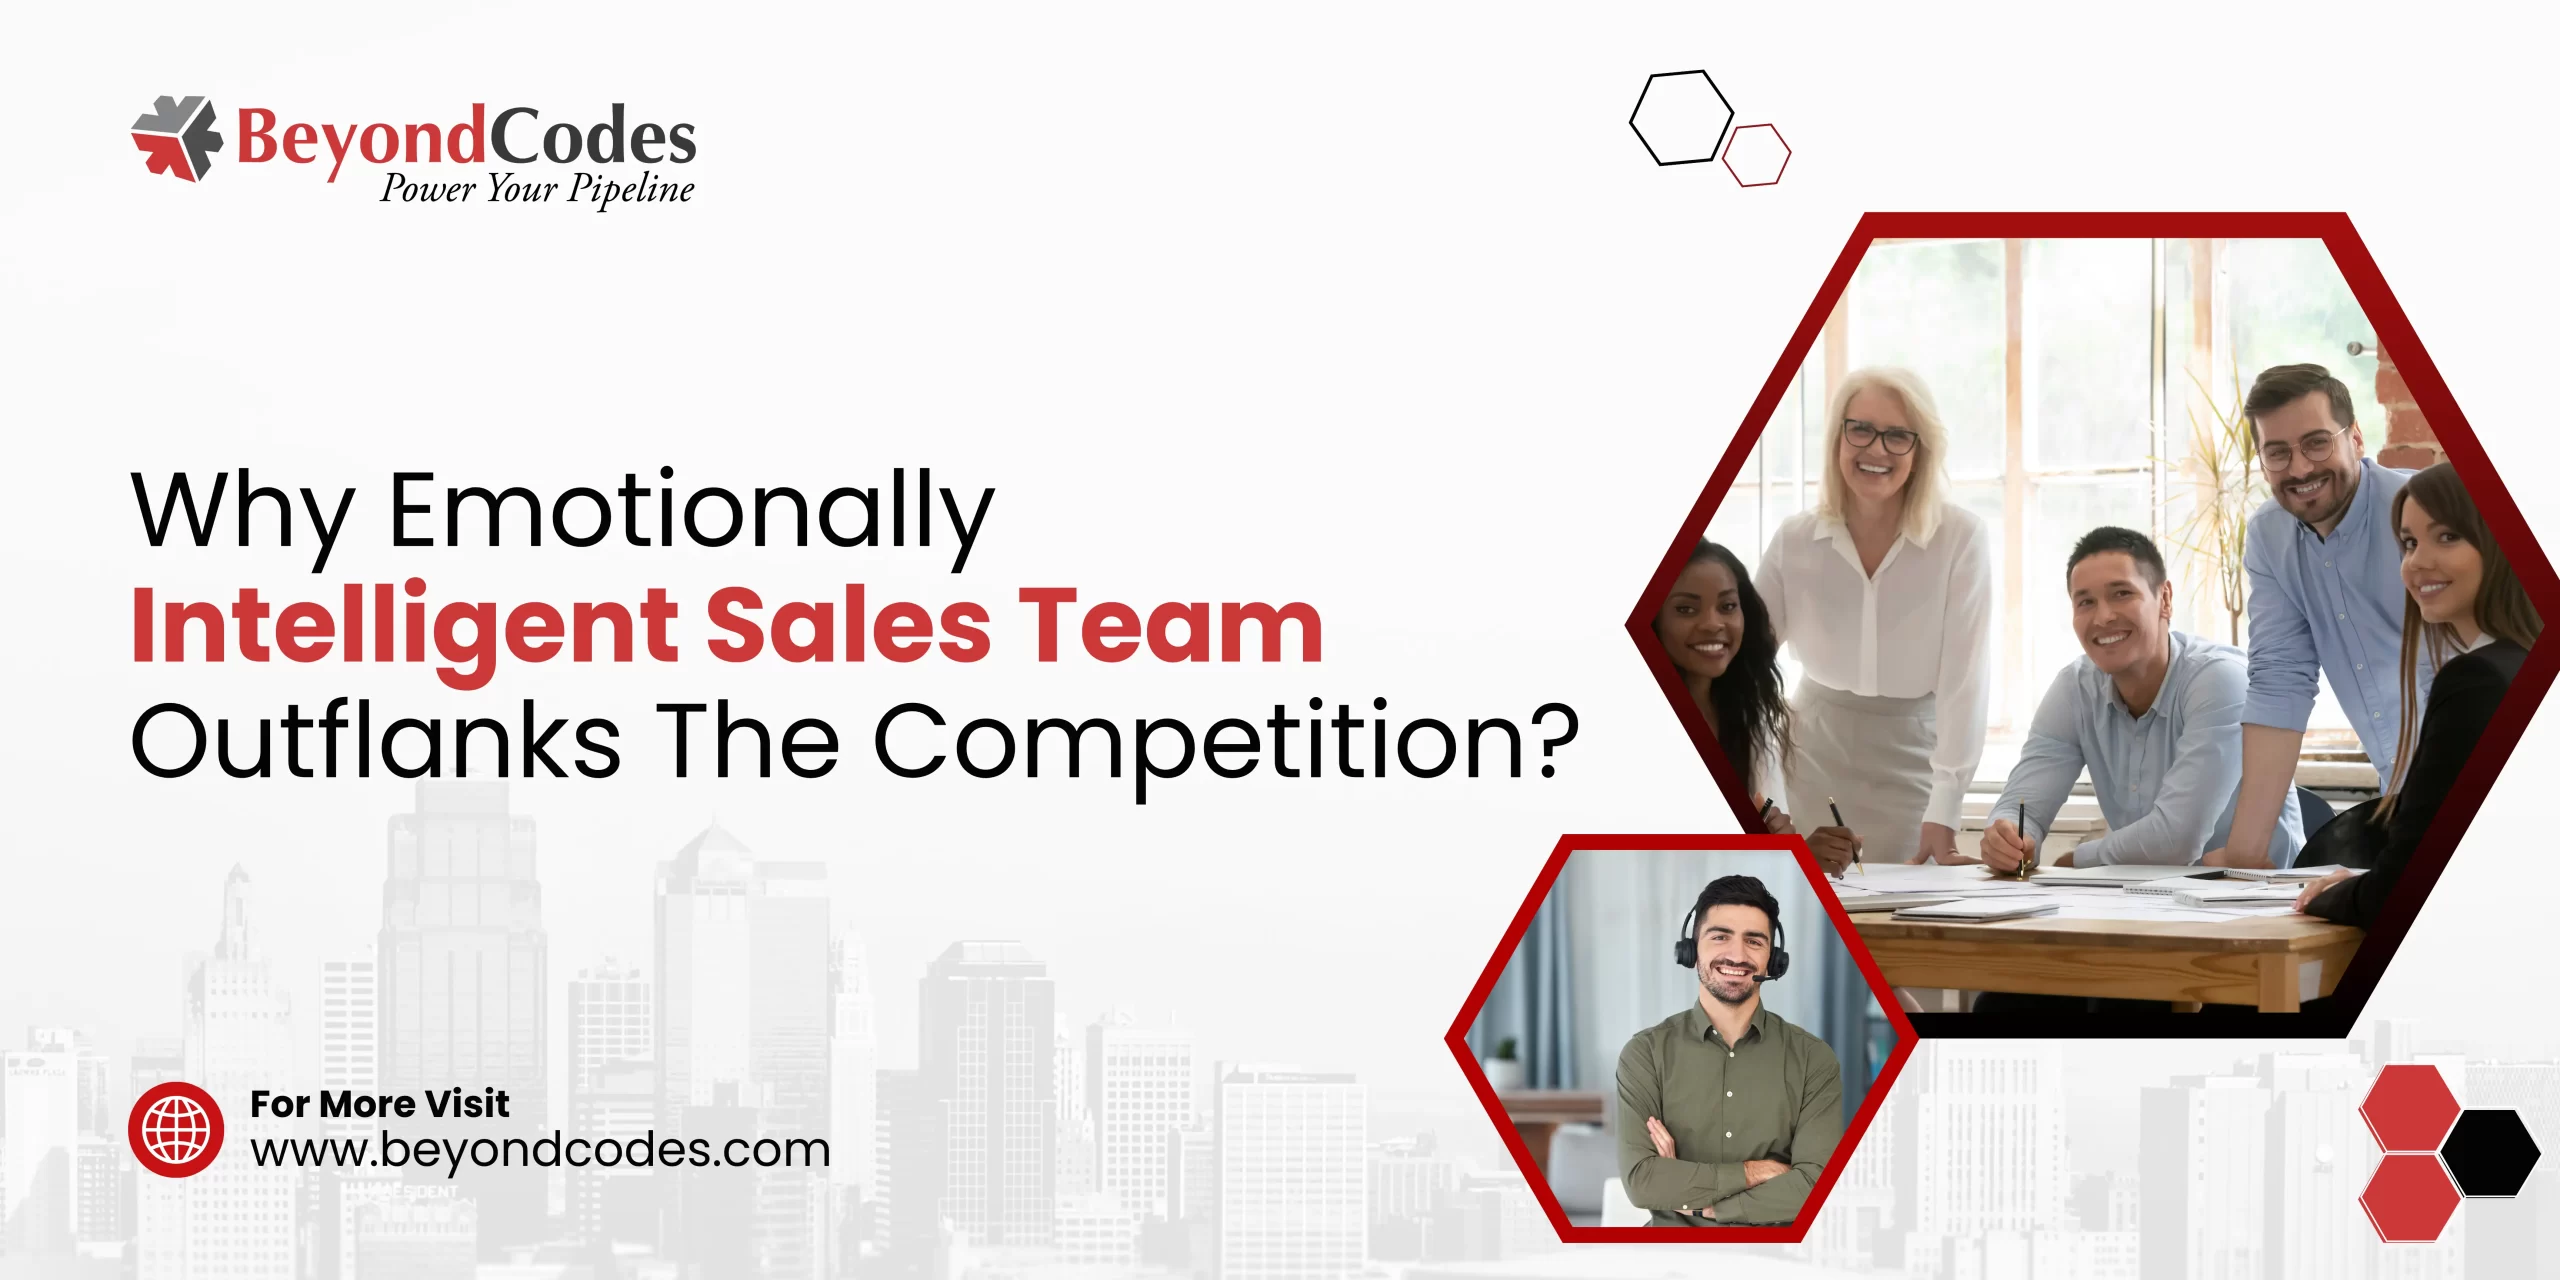 Why Emotionally Intelligent Sales Team Outflanks The Competition